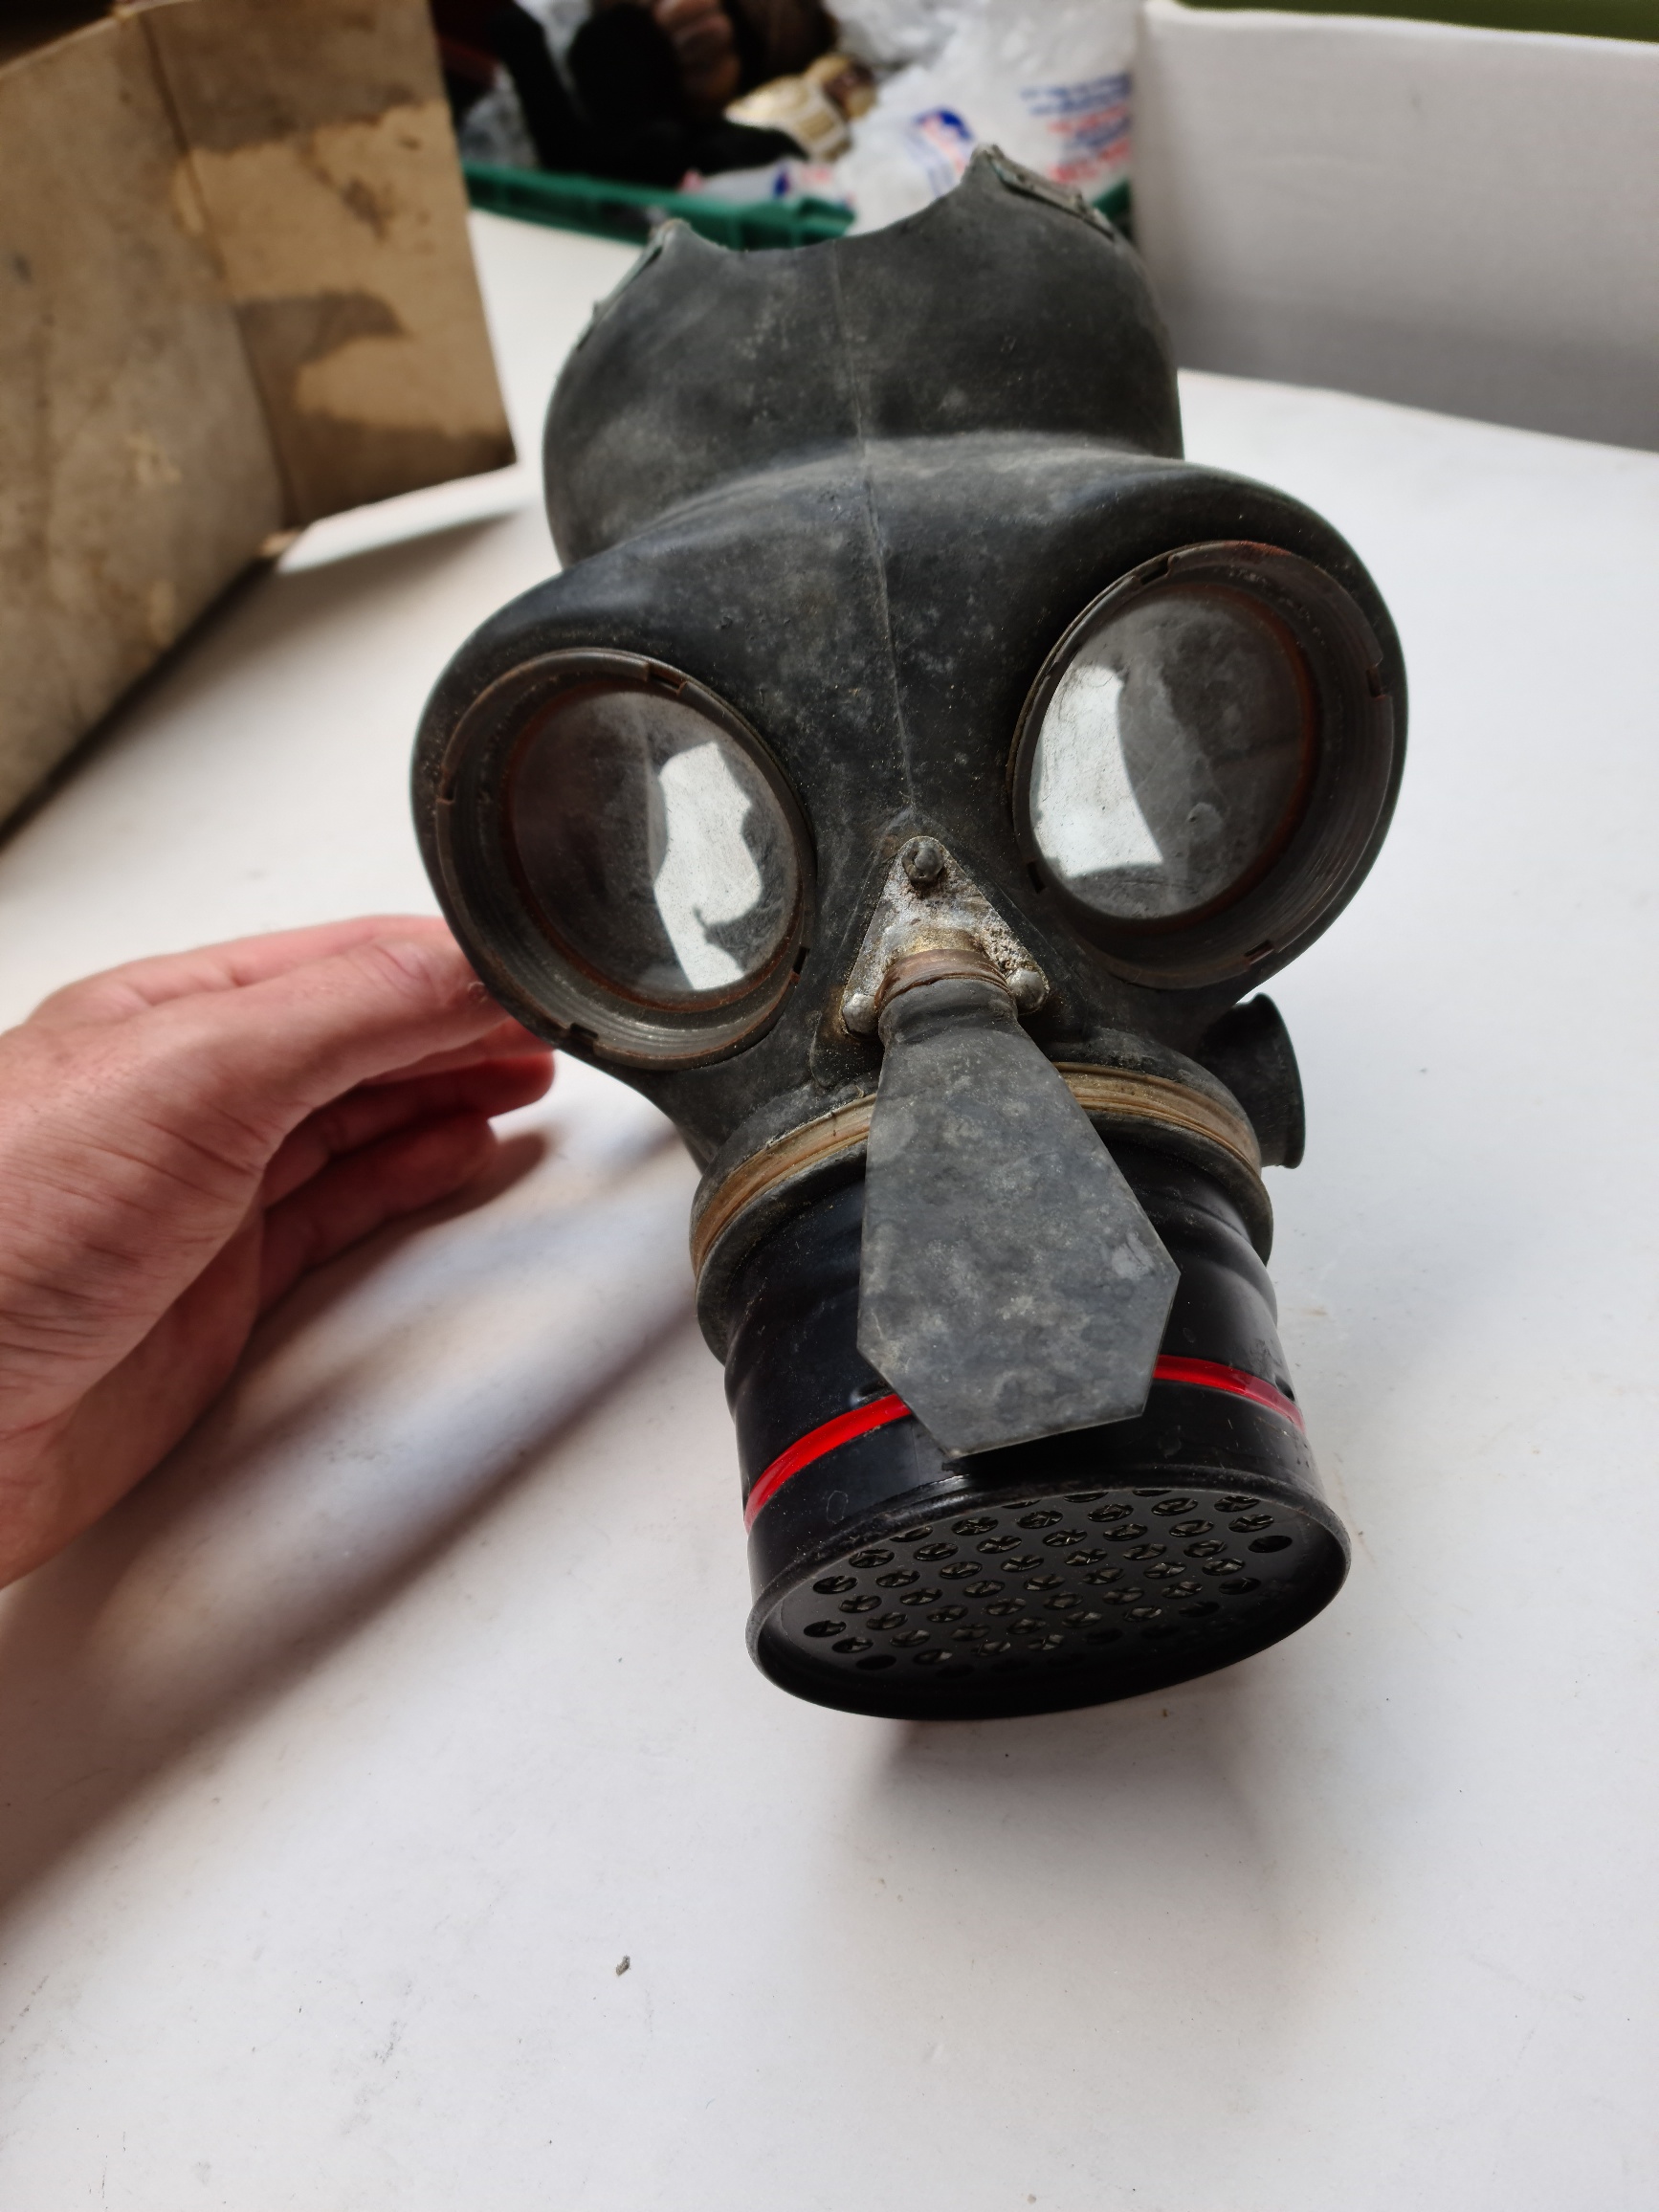 WW2 gas mask in box. - Image 4 of 8